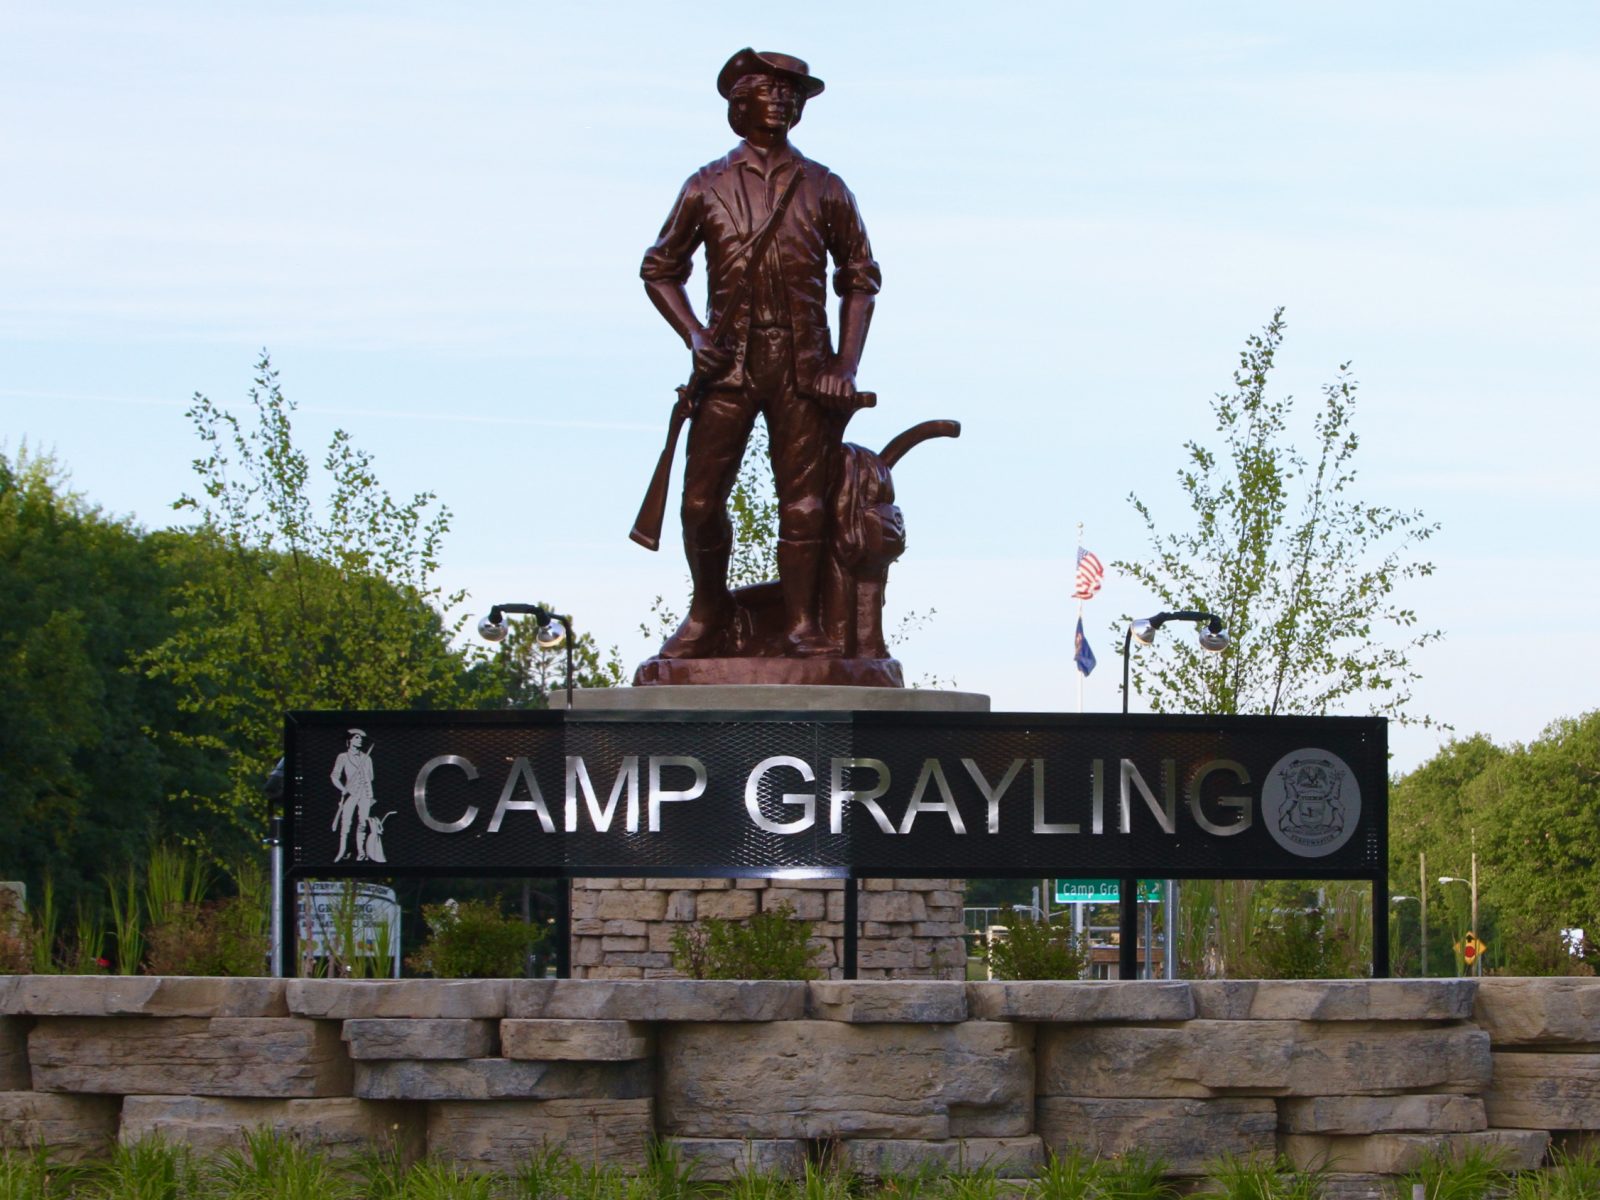 A stoic statue at Camp Grayling, standing as a sentinel and a symbol of honor.